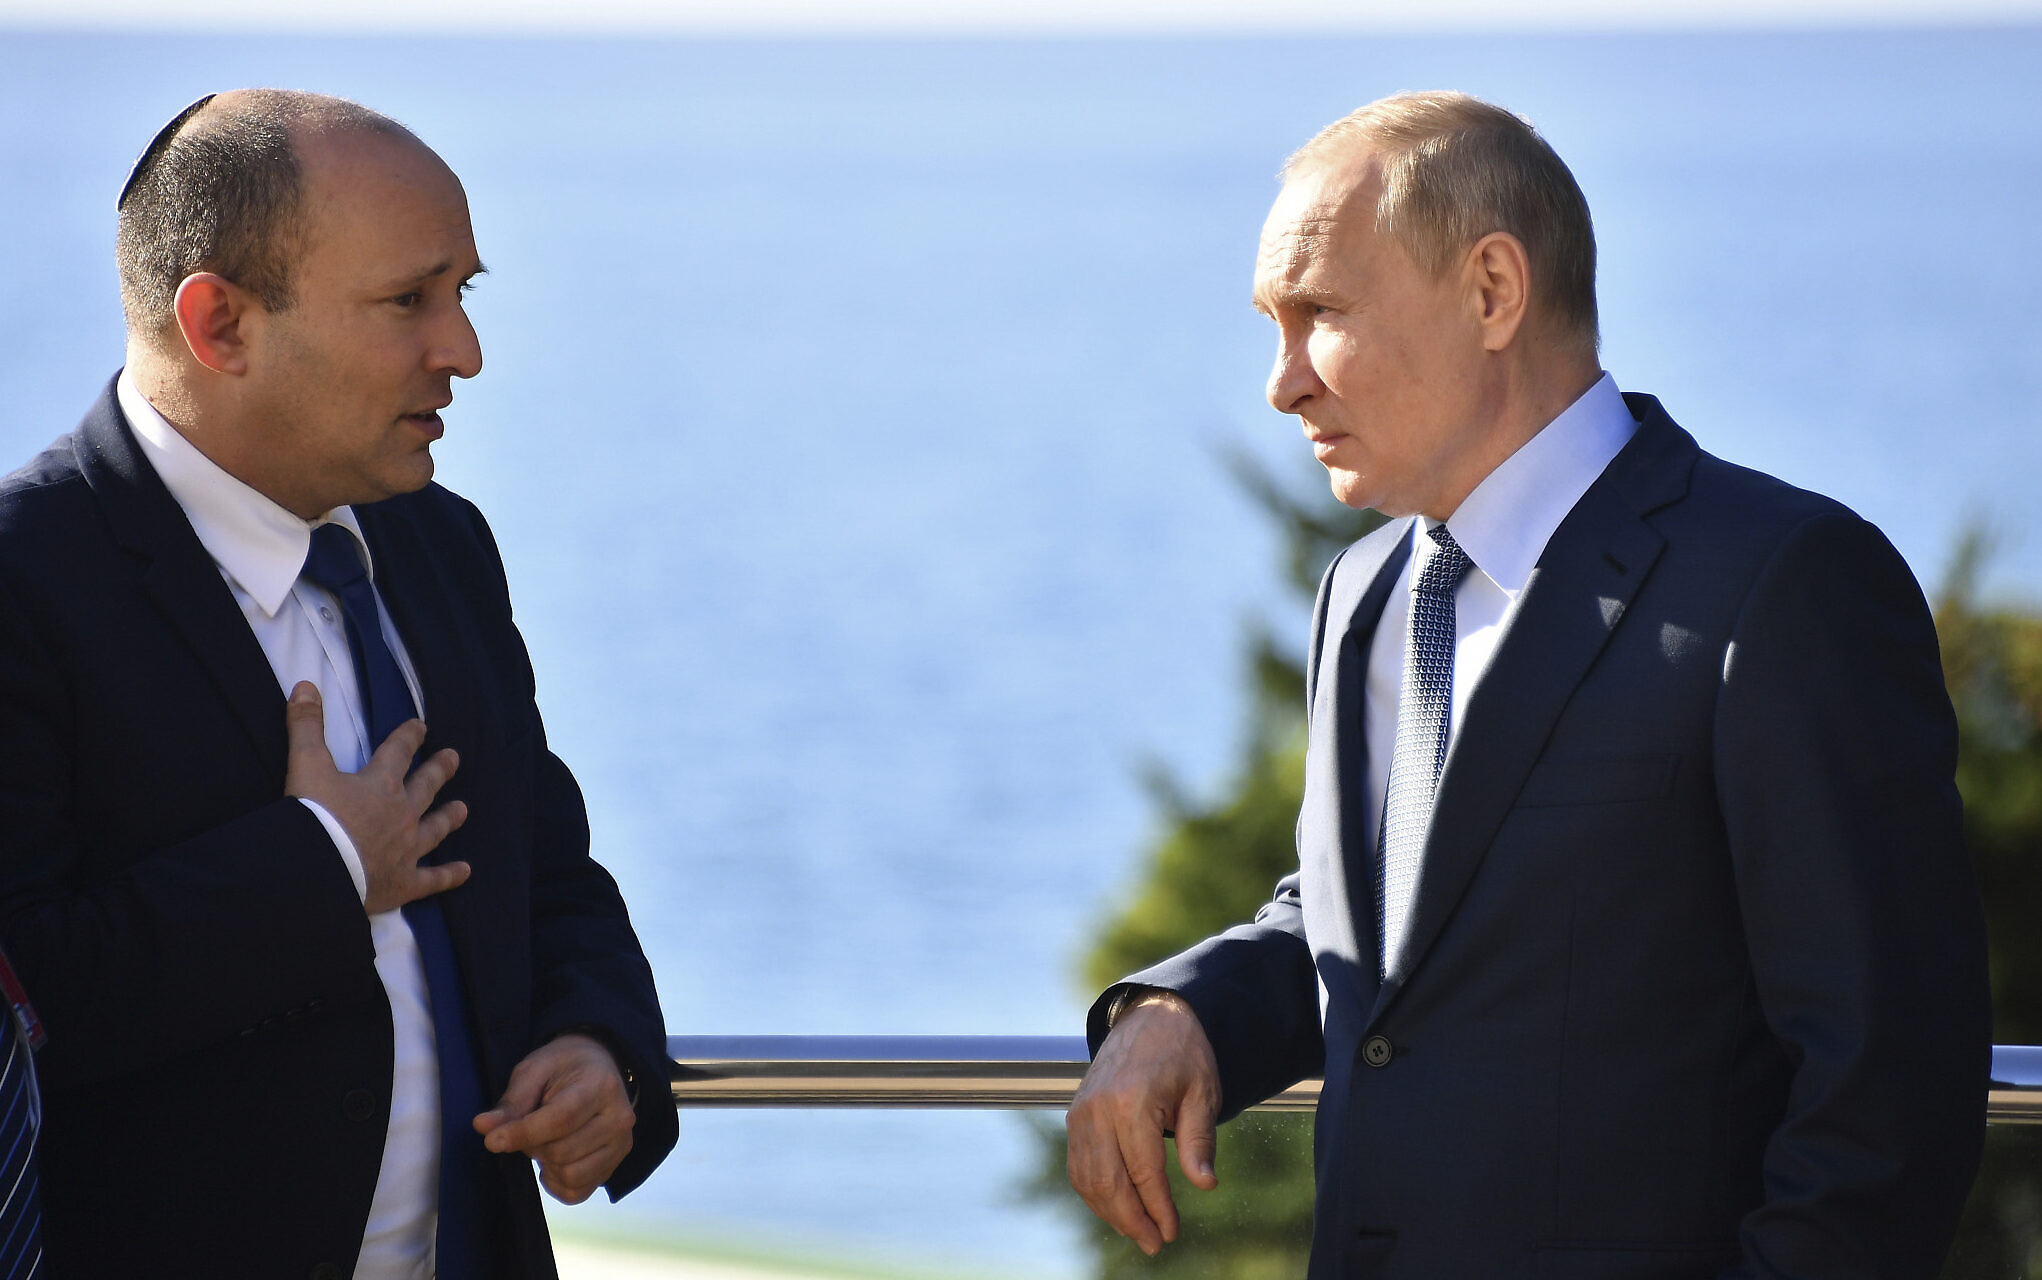 Bennett holds follow-up call with Putin after Moscow meeting | The Times of Israel